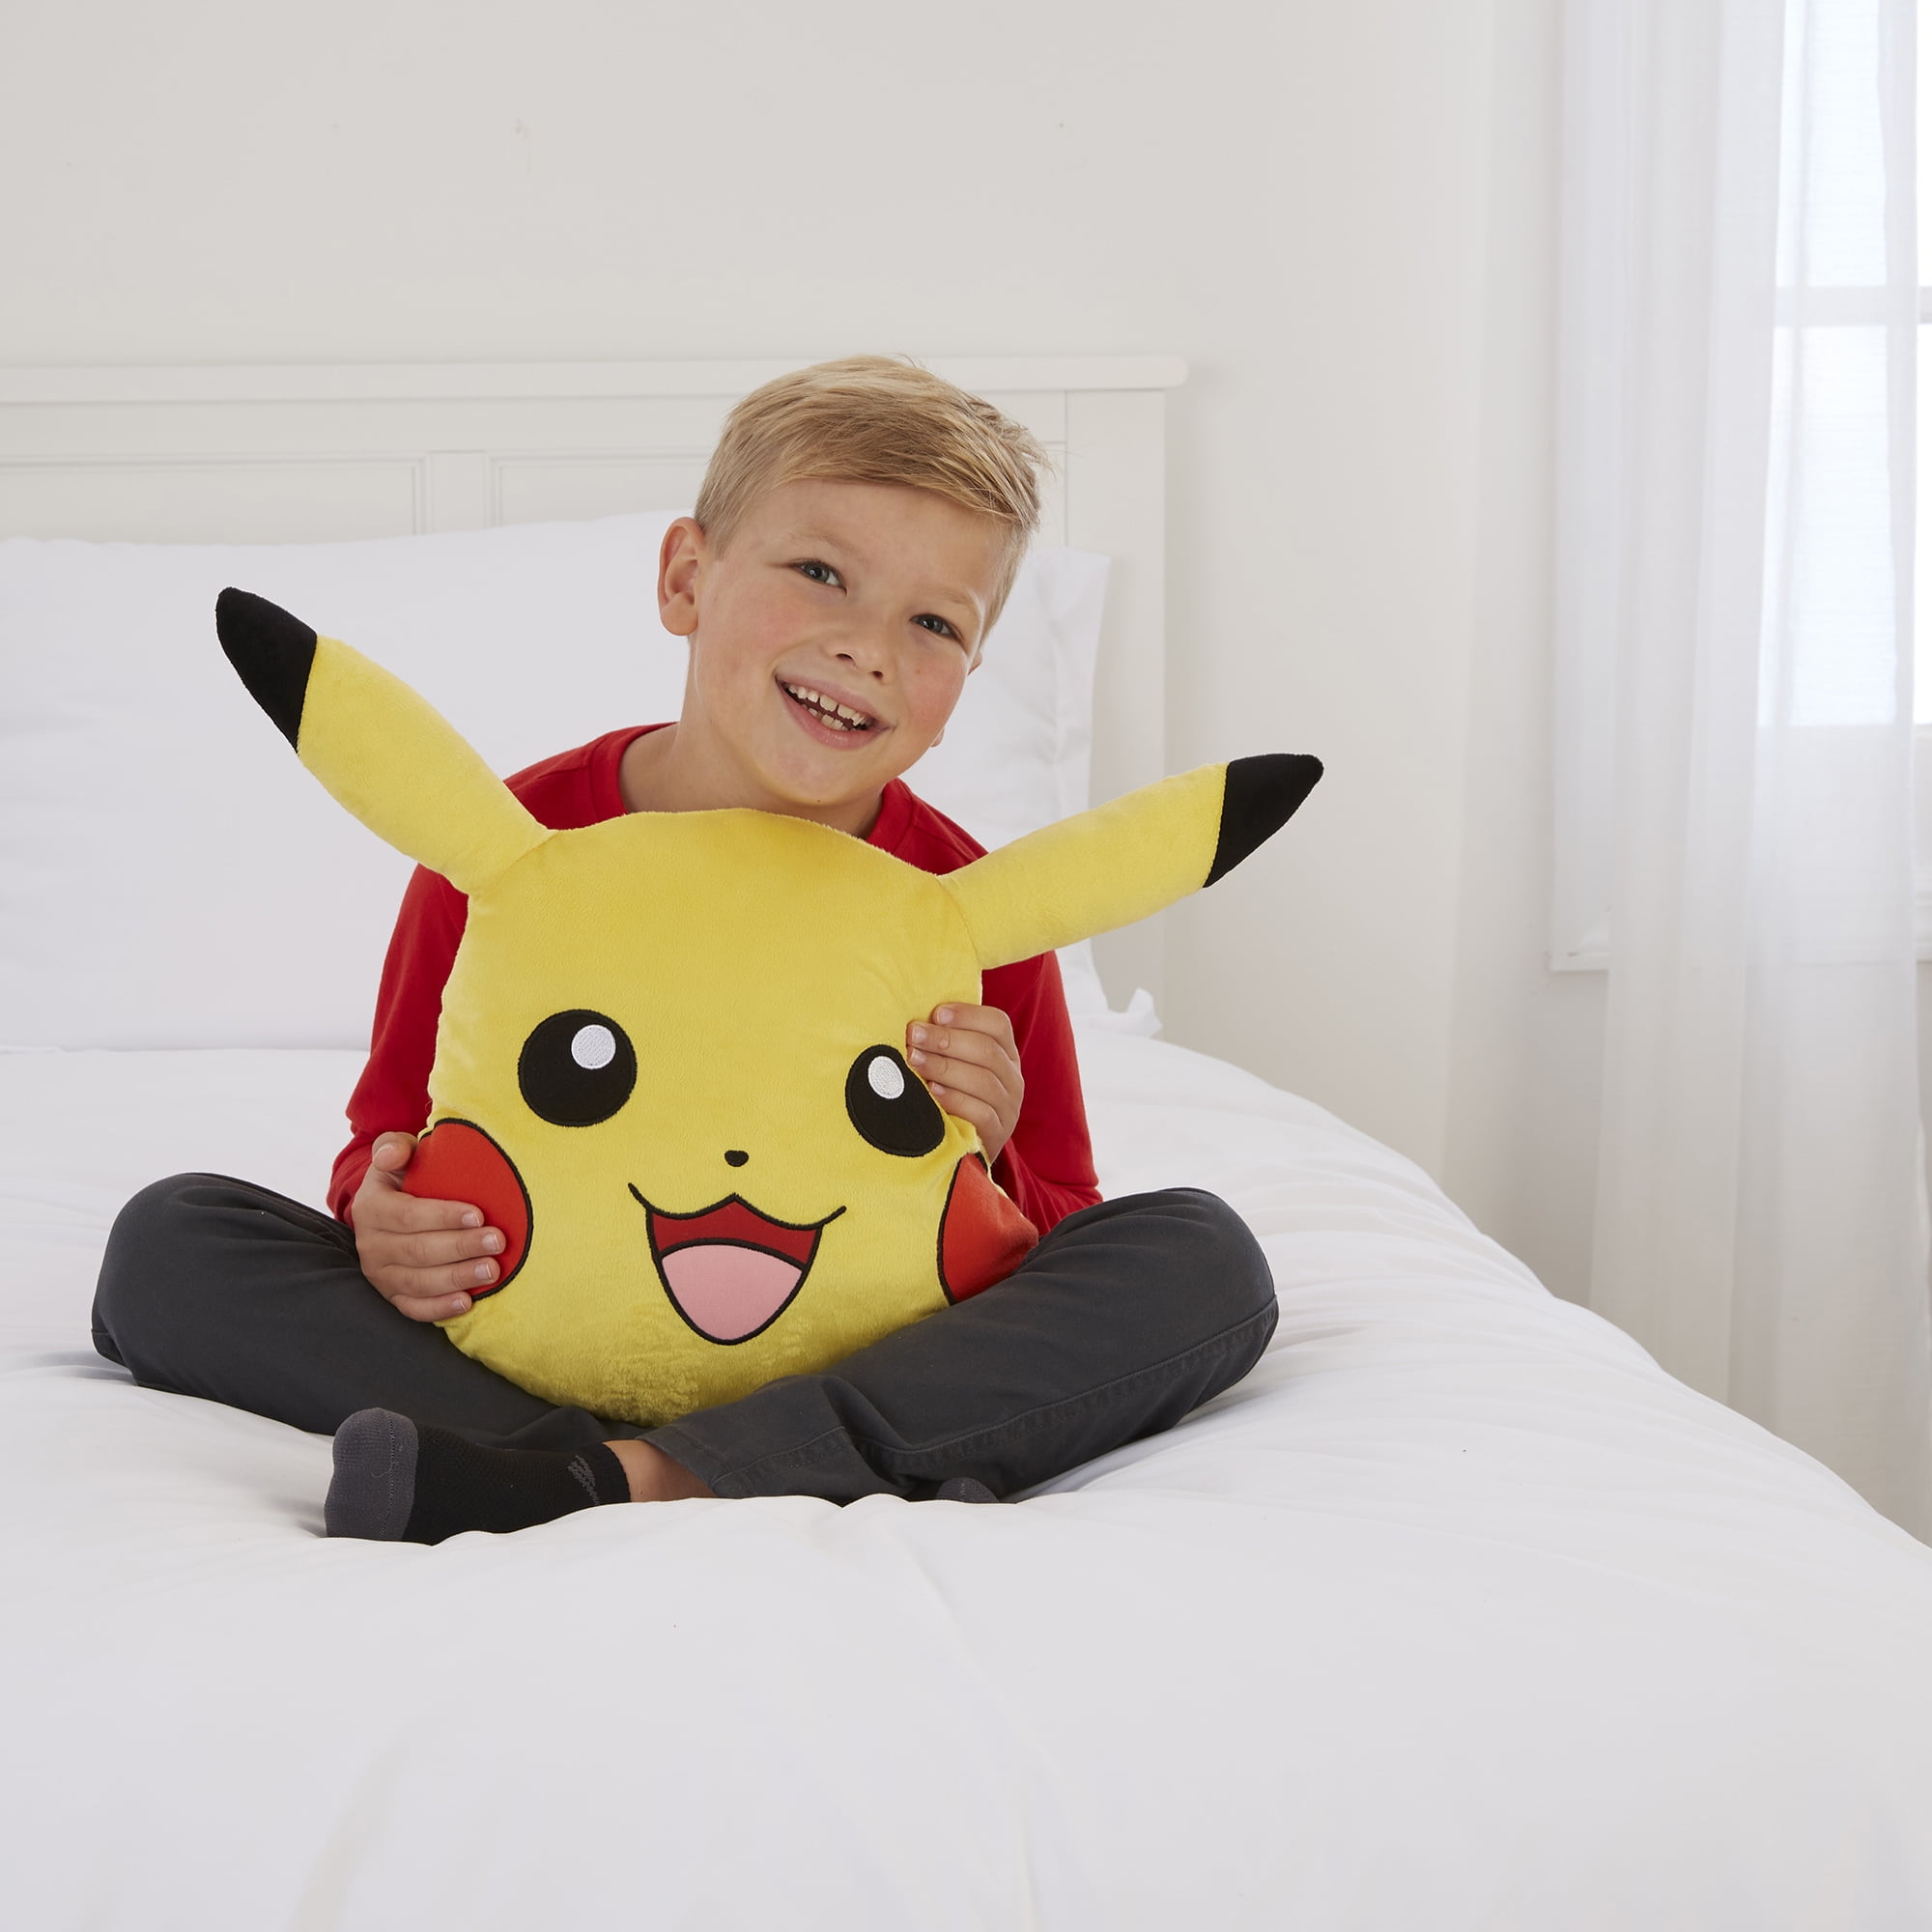 WYMDDYM Soft Pikachu Plush Fold Pillow Small Blanket Pillow Rest Pillow for Boys and Girls